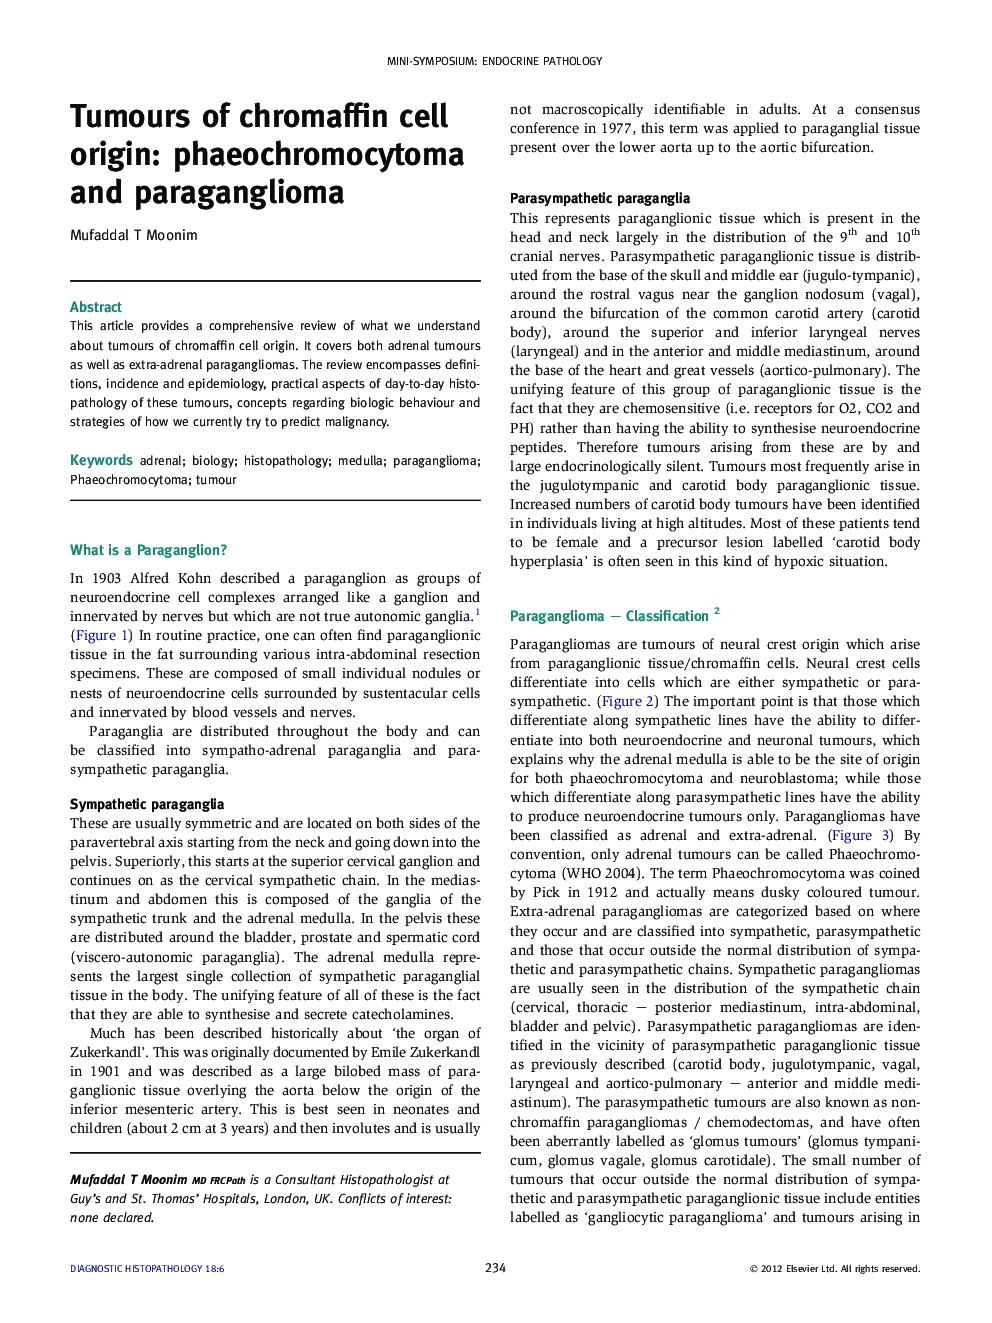 Tumours of chromaffin cell origin: phaeochromocytoma and paraganglioma